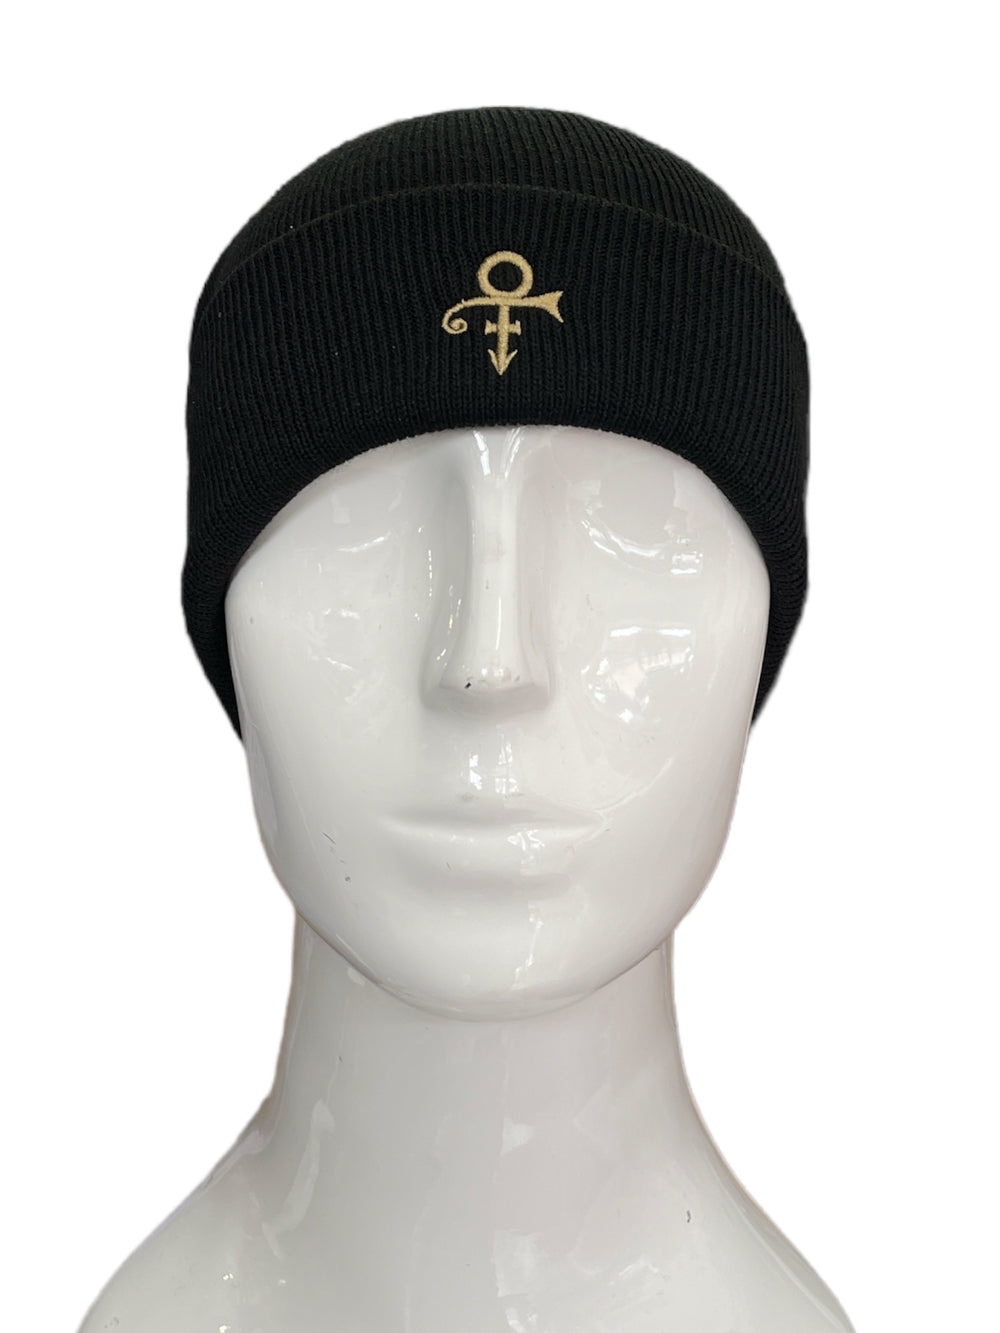 Prince Love Symbol Turn Up Beanie Hat Gold Thread Embroidery Official & Xclusive